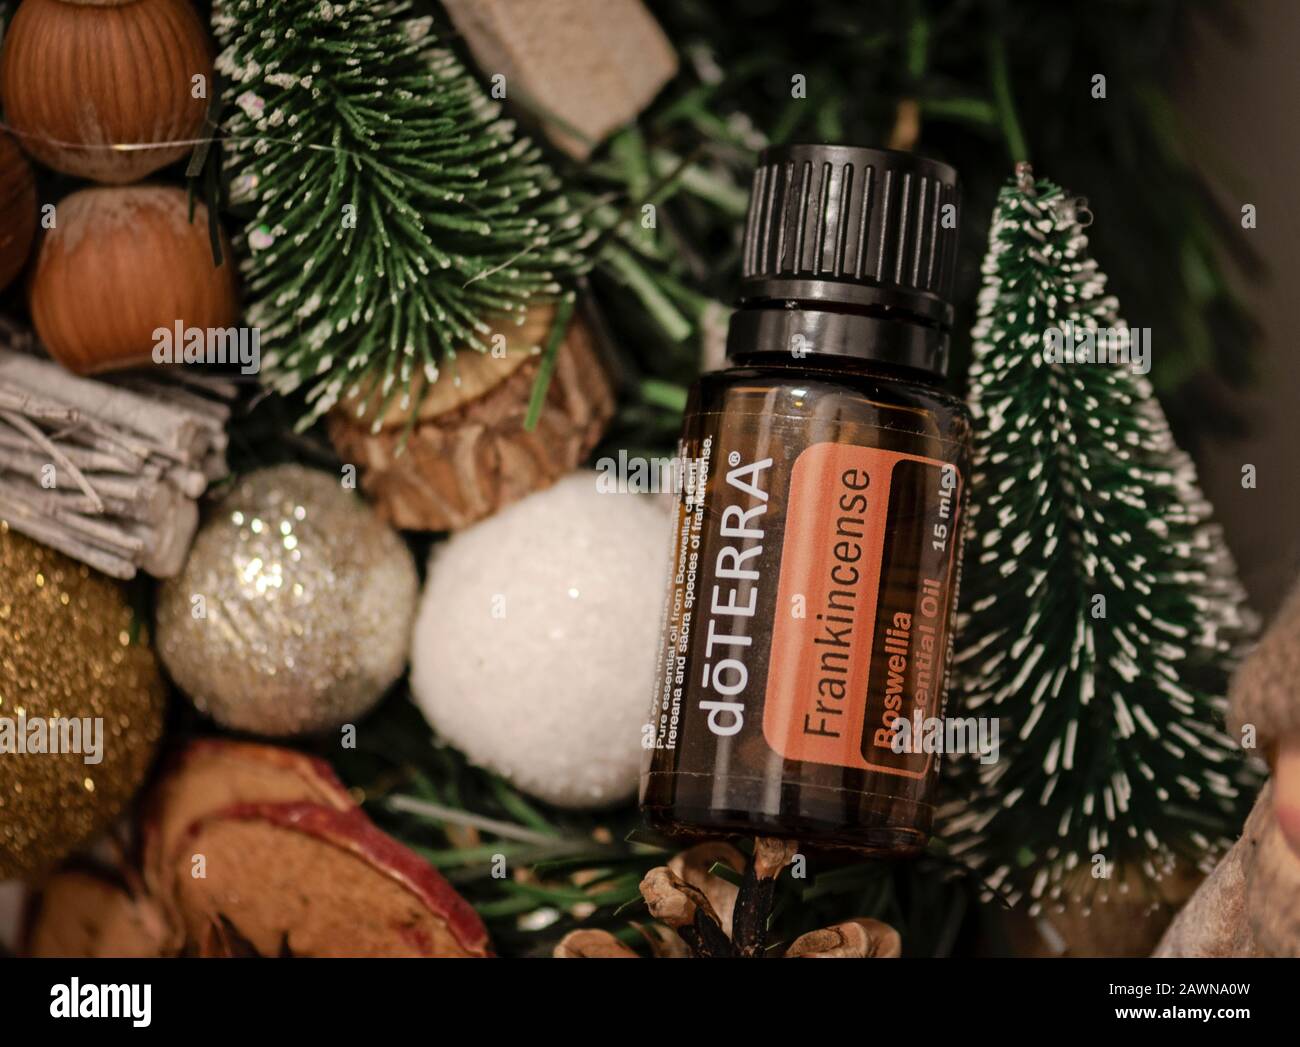 Banska Bystrica, Slovakia - December 8th 2019: High quality essential oil Doterra brand. Frankincense essential oil. Healthcare and wellbeing concept. Stock Photo